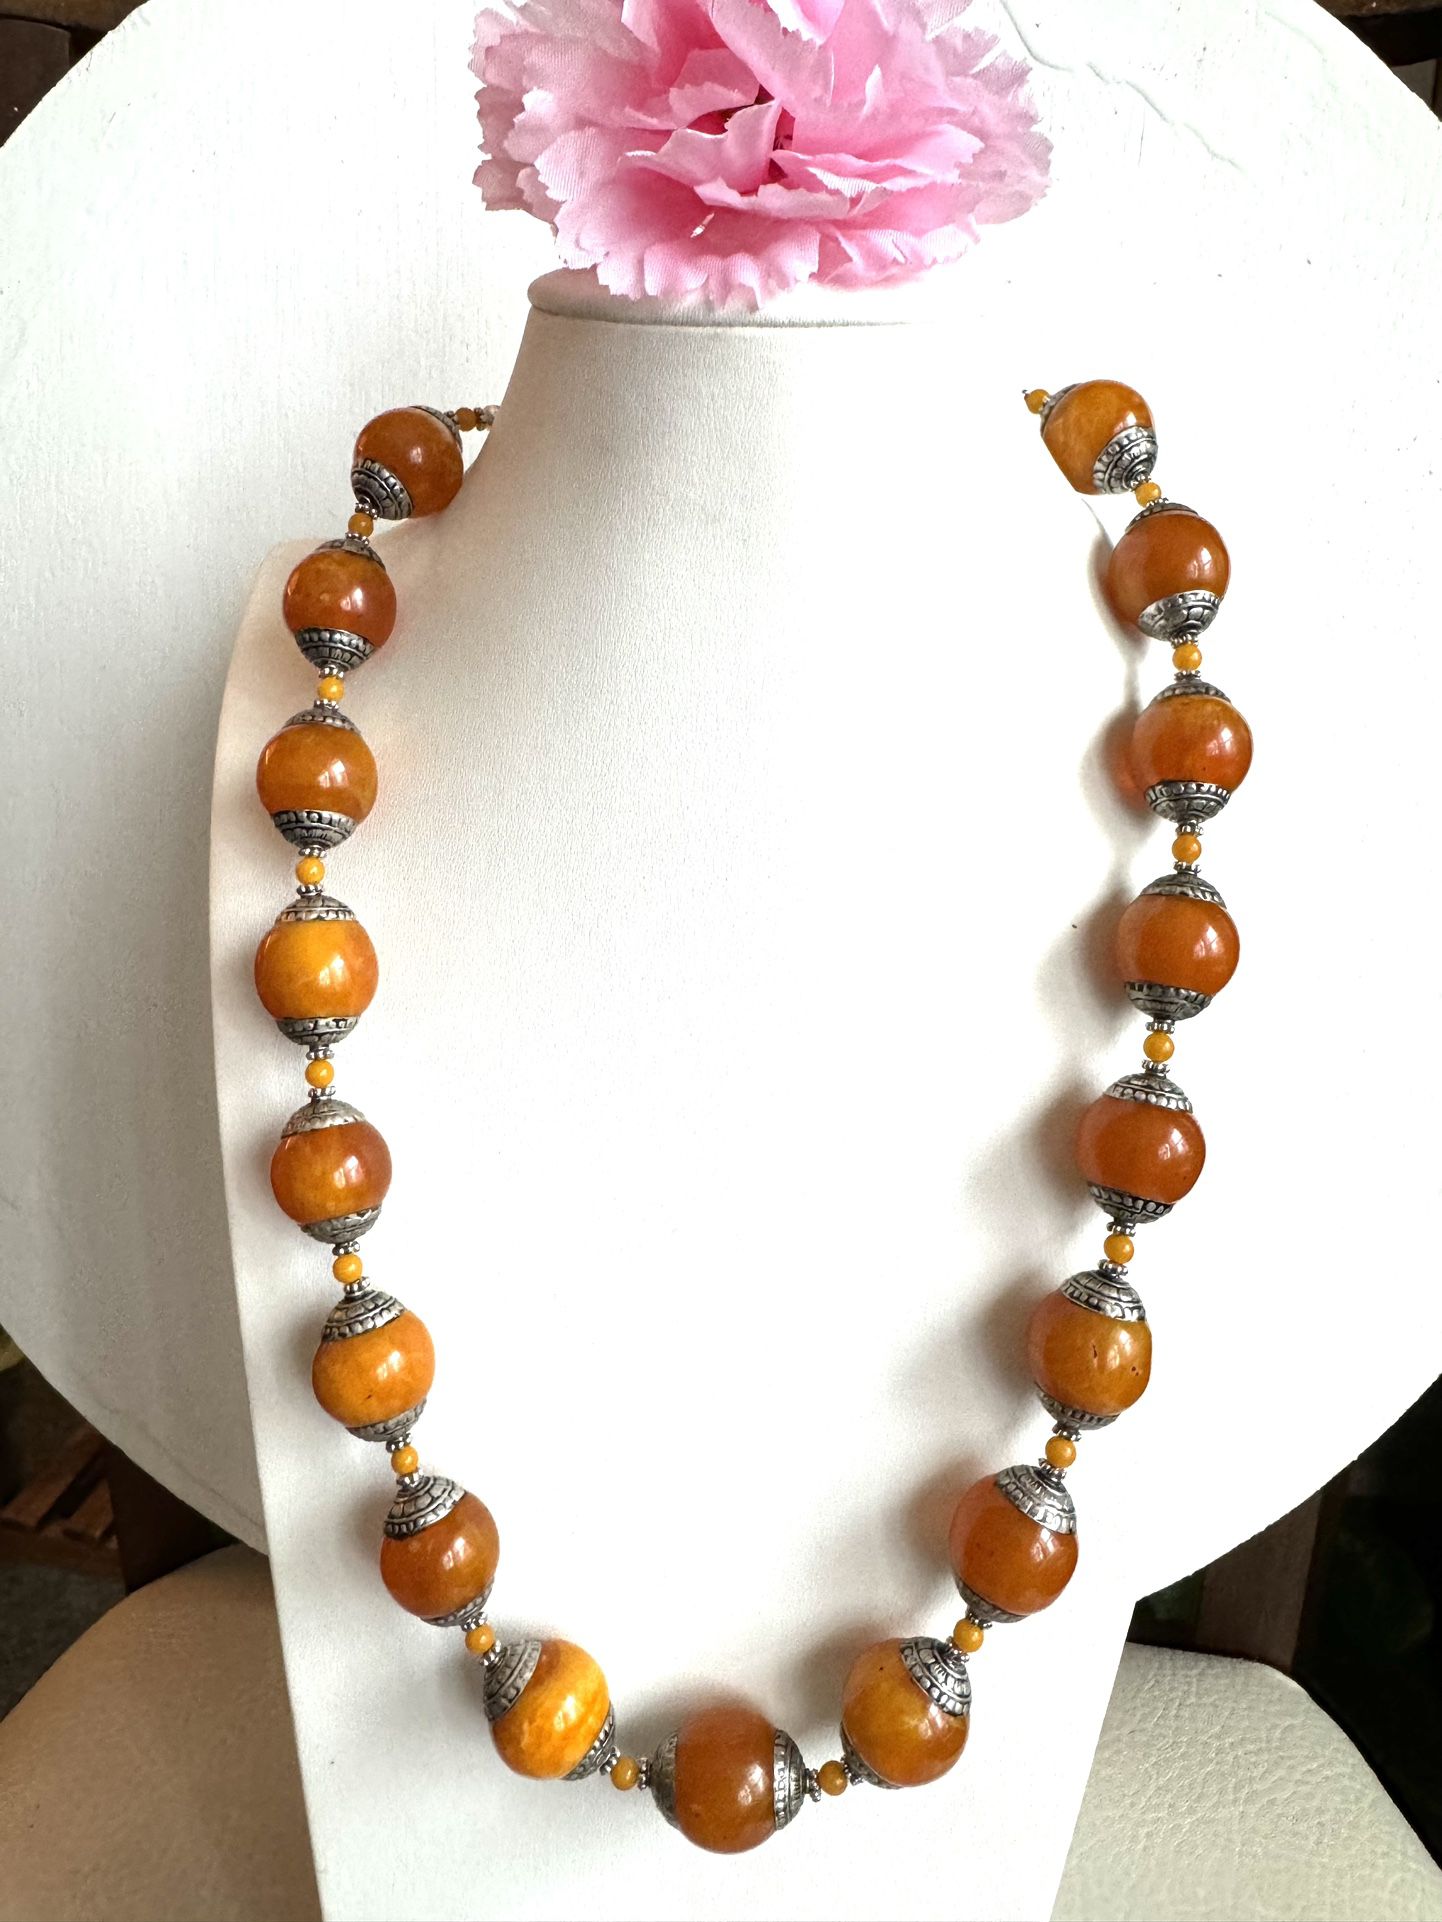 Vintage and beautiful hand carved Tibetan silver Amber resin beads necklace 23”inch long